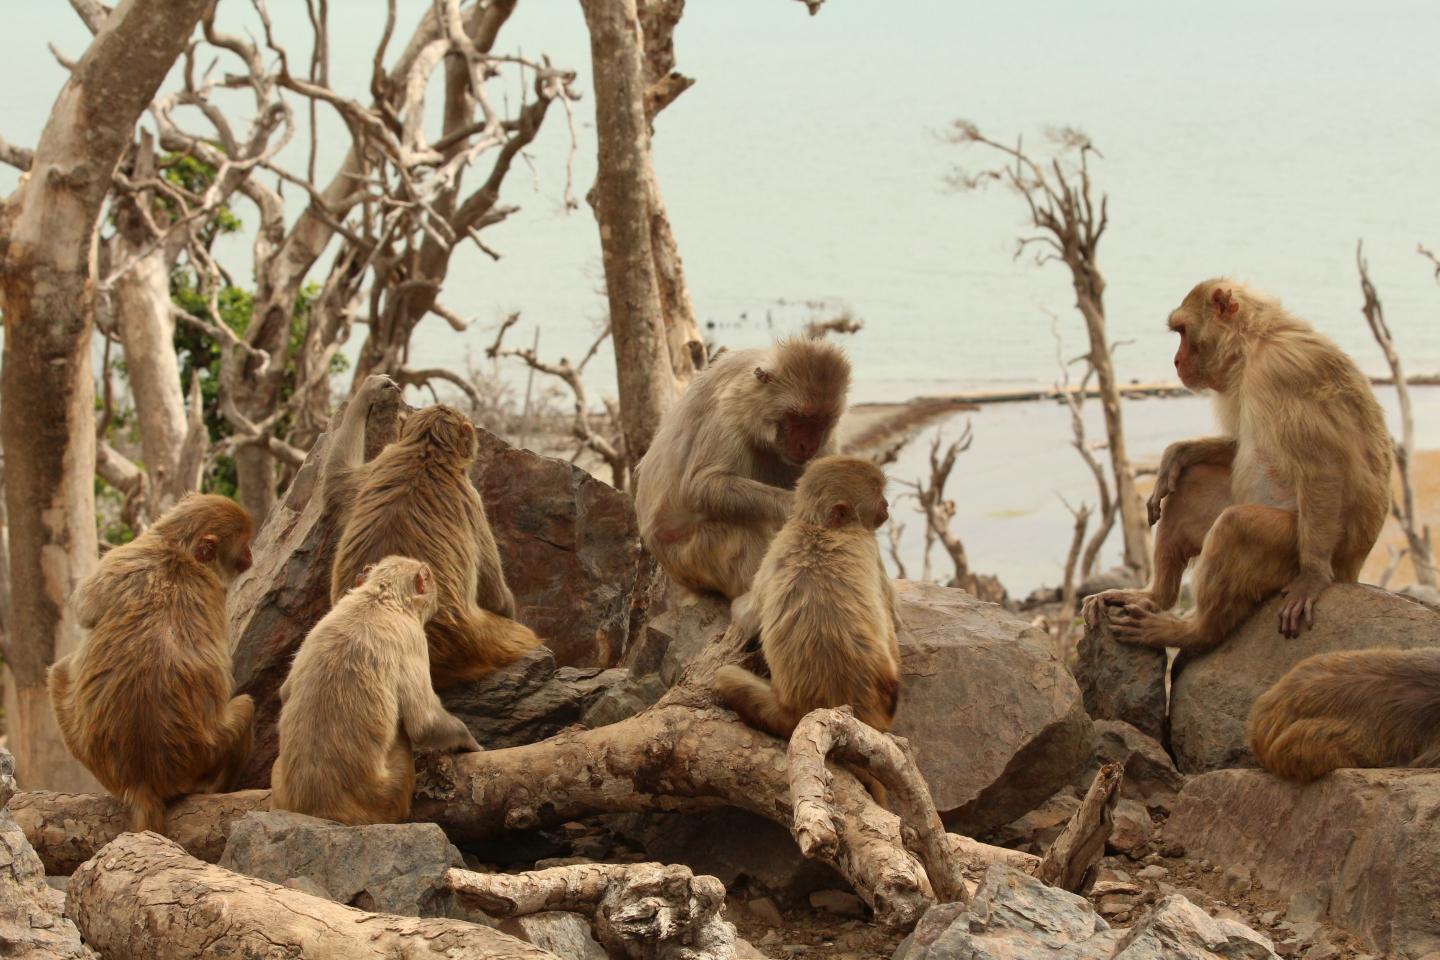 Group of macaques sitting together and grooming, with bare landscape in the background